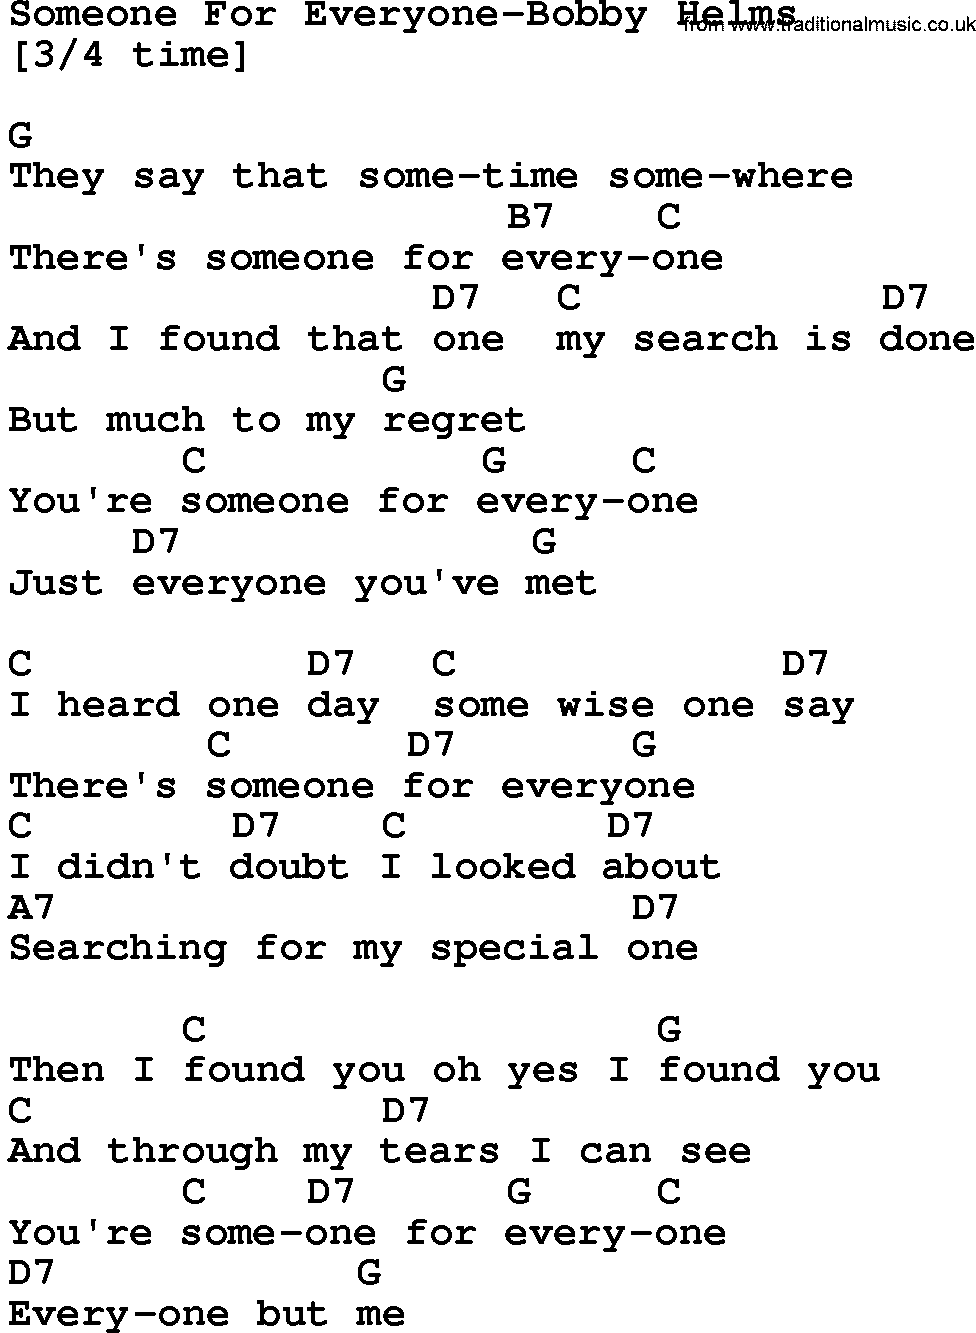 Country music song: Someone For Everyone-Bobby Helms lyrics and chords